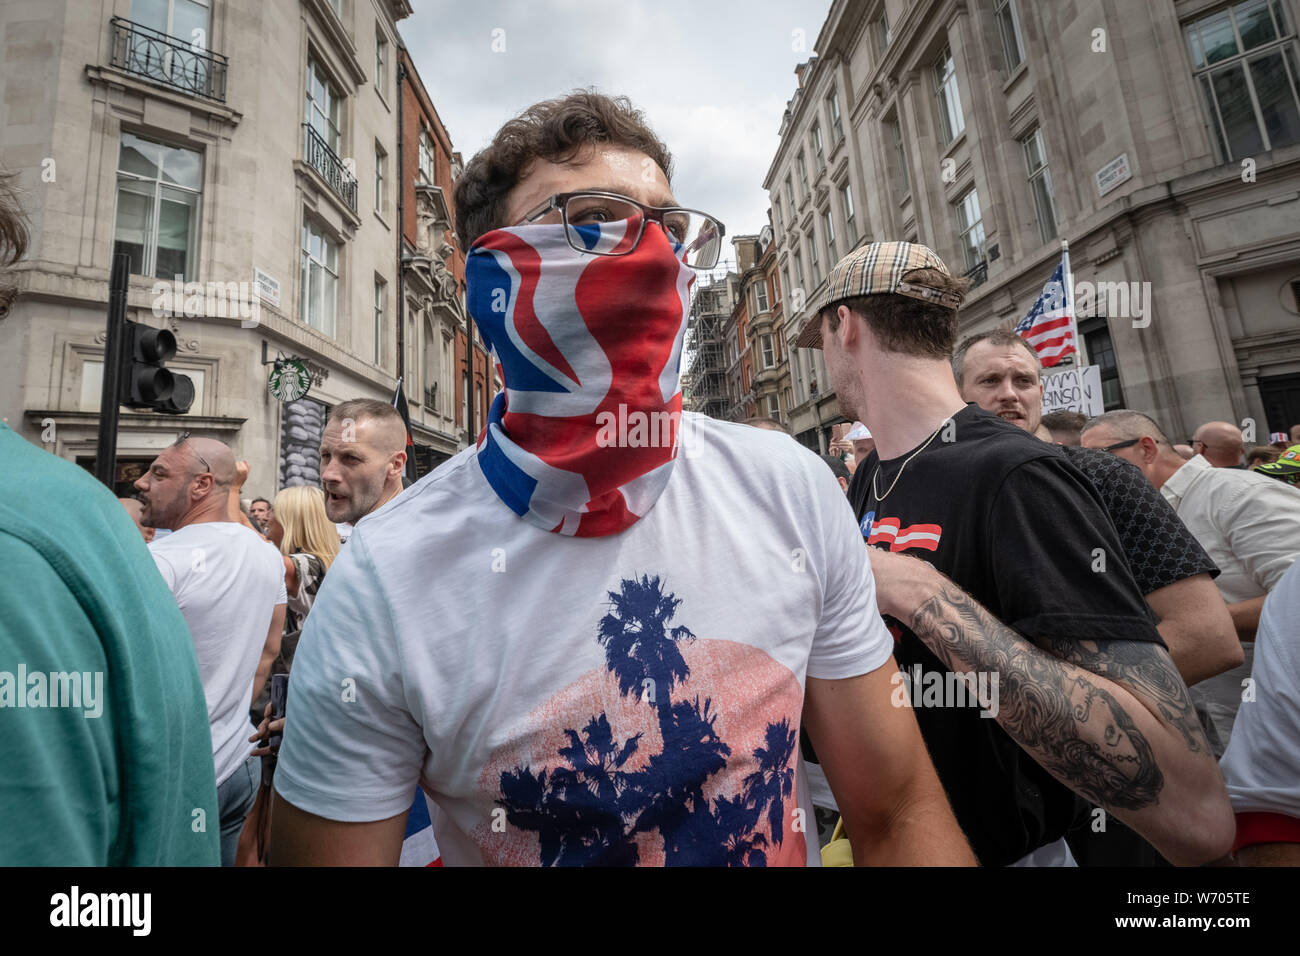 London, UK. 3rd August, 2019. 'Free Tommy Robinson' protest. Police arrest twenty four during a mass demonstration in support of the jailed Tommy Robinson, real name Stephen Yaxley-Lennon, who was sentenced last month to nine months in prison after being found guilty in contempt of court. Counter-protesters including antifascist activists and the anti-racist group: Stand Up to Racism, opposed the pro-Robinson demonstrators with protest groups kept apart by met police with some clashes. Credit: Guy Corbishley/Alamy Live News Stock Photo